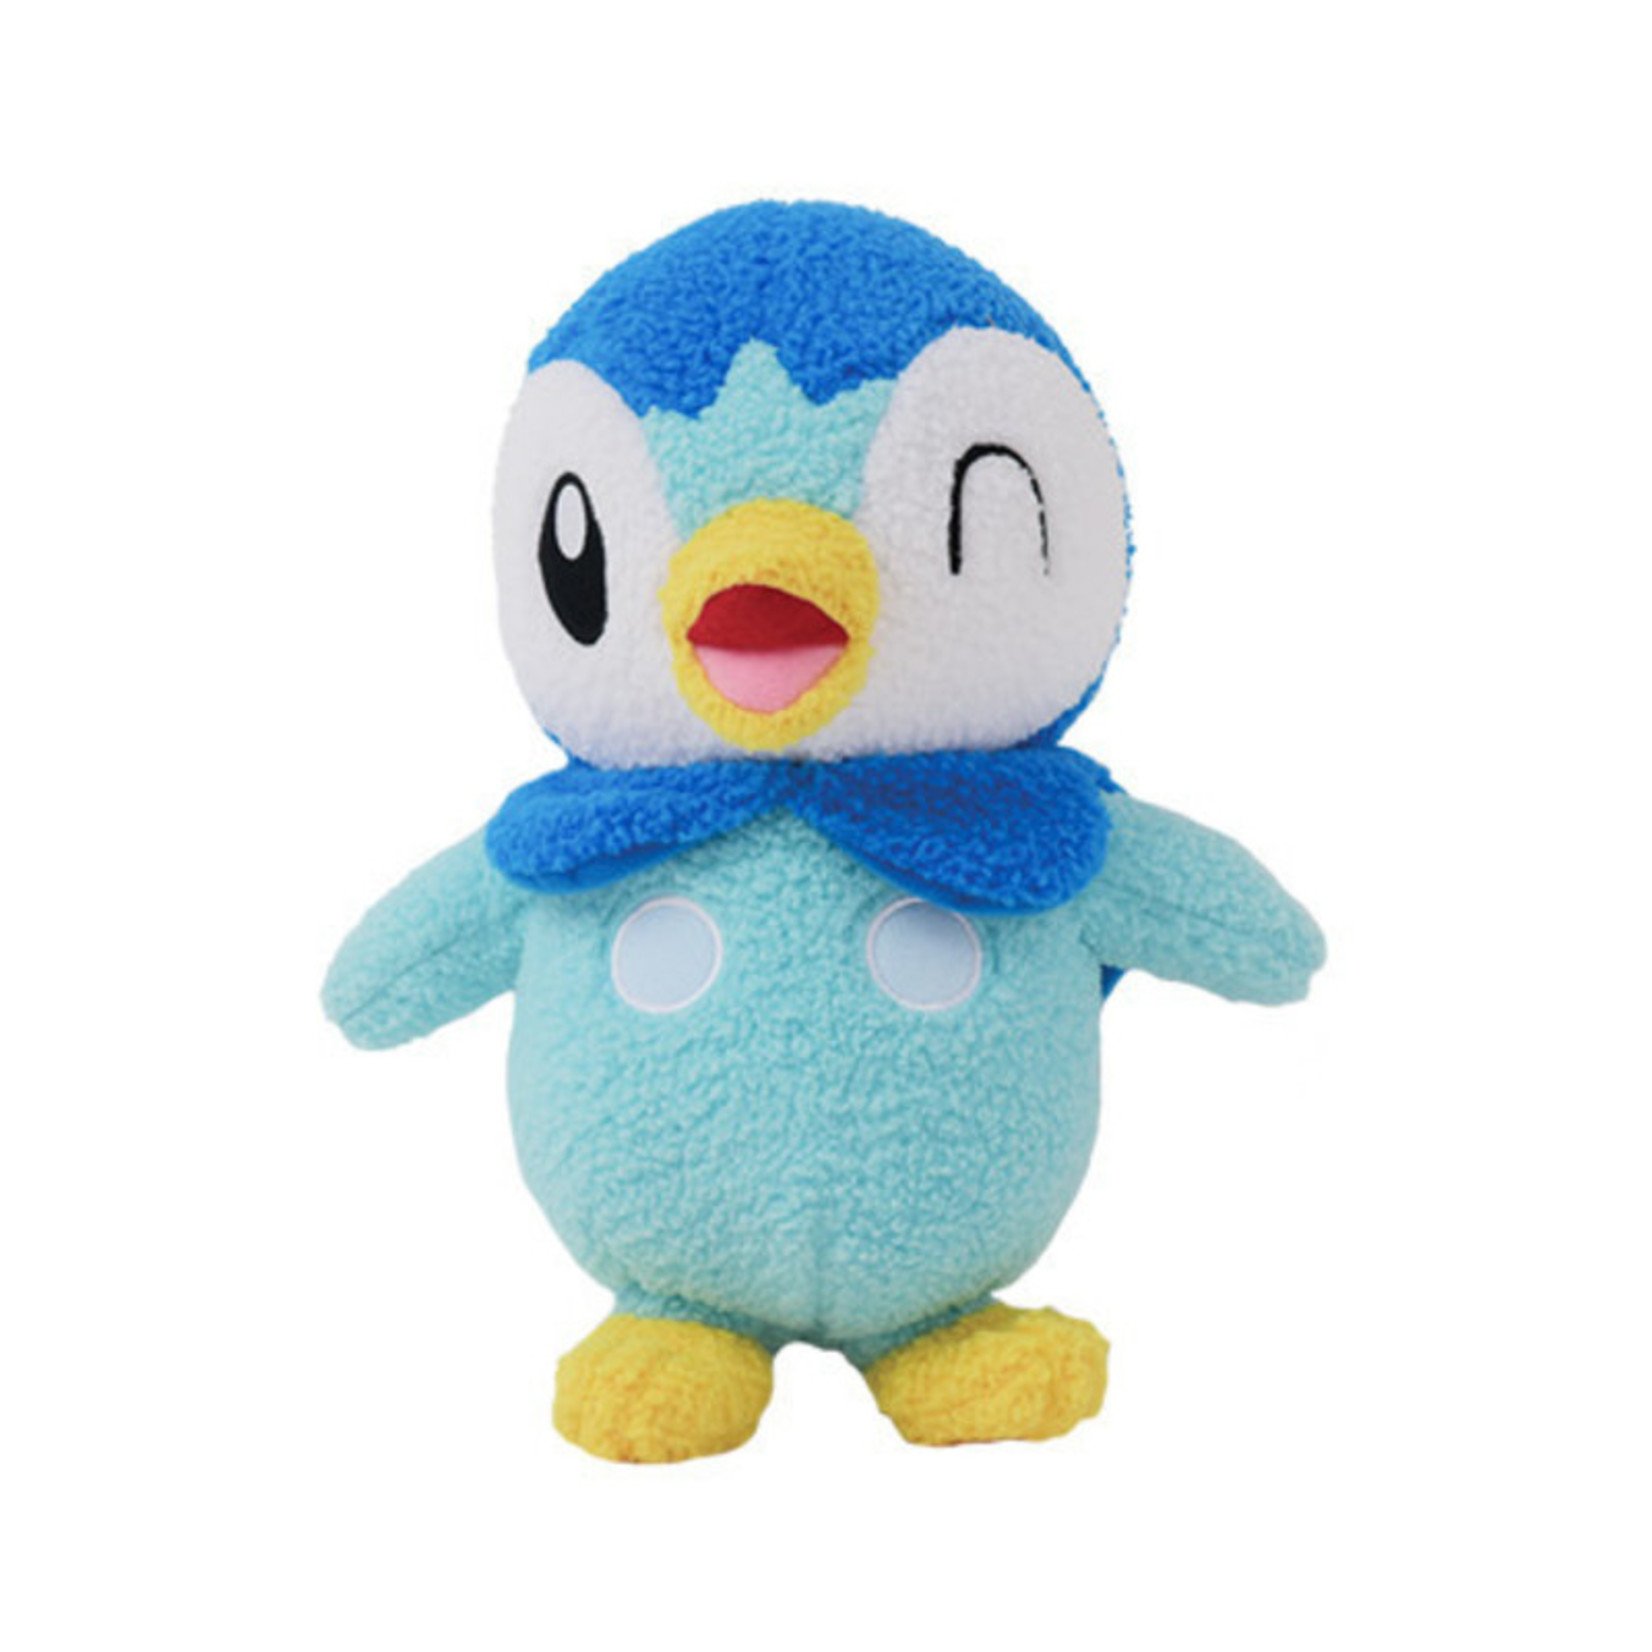 Curly Piplup 25cm